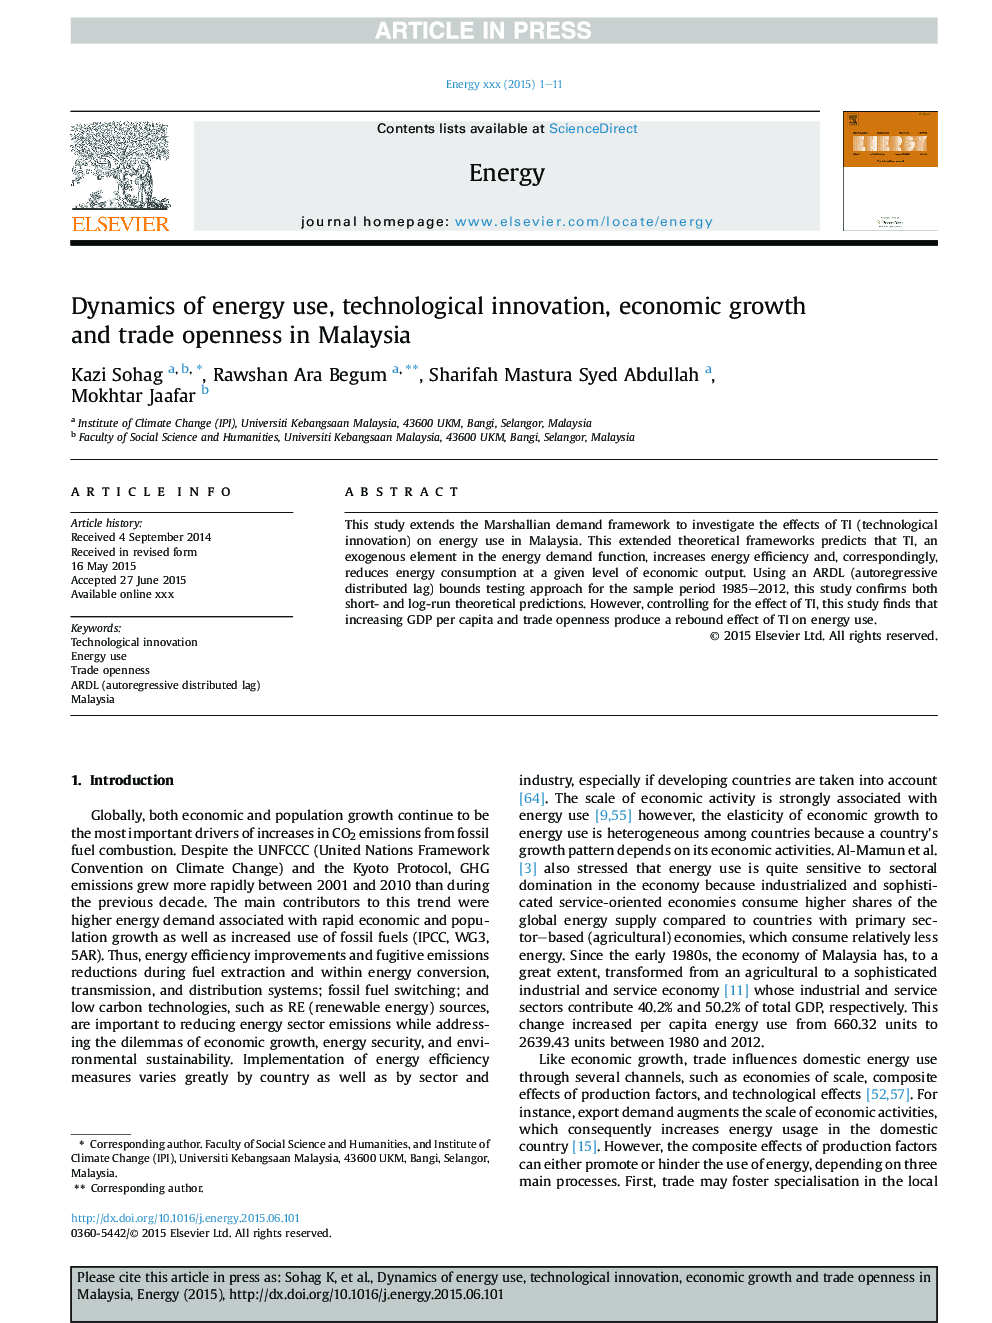 Dynamics of energy use, technological innovation, economic growth and trade openness in Malaysia